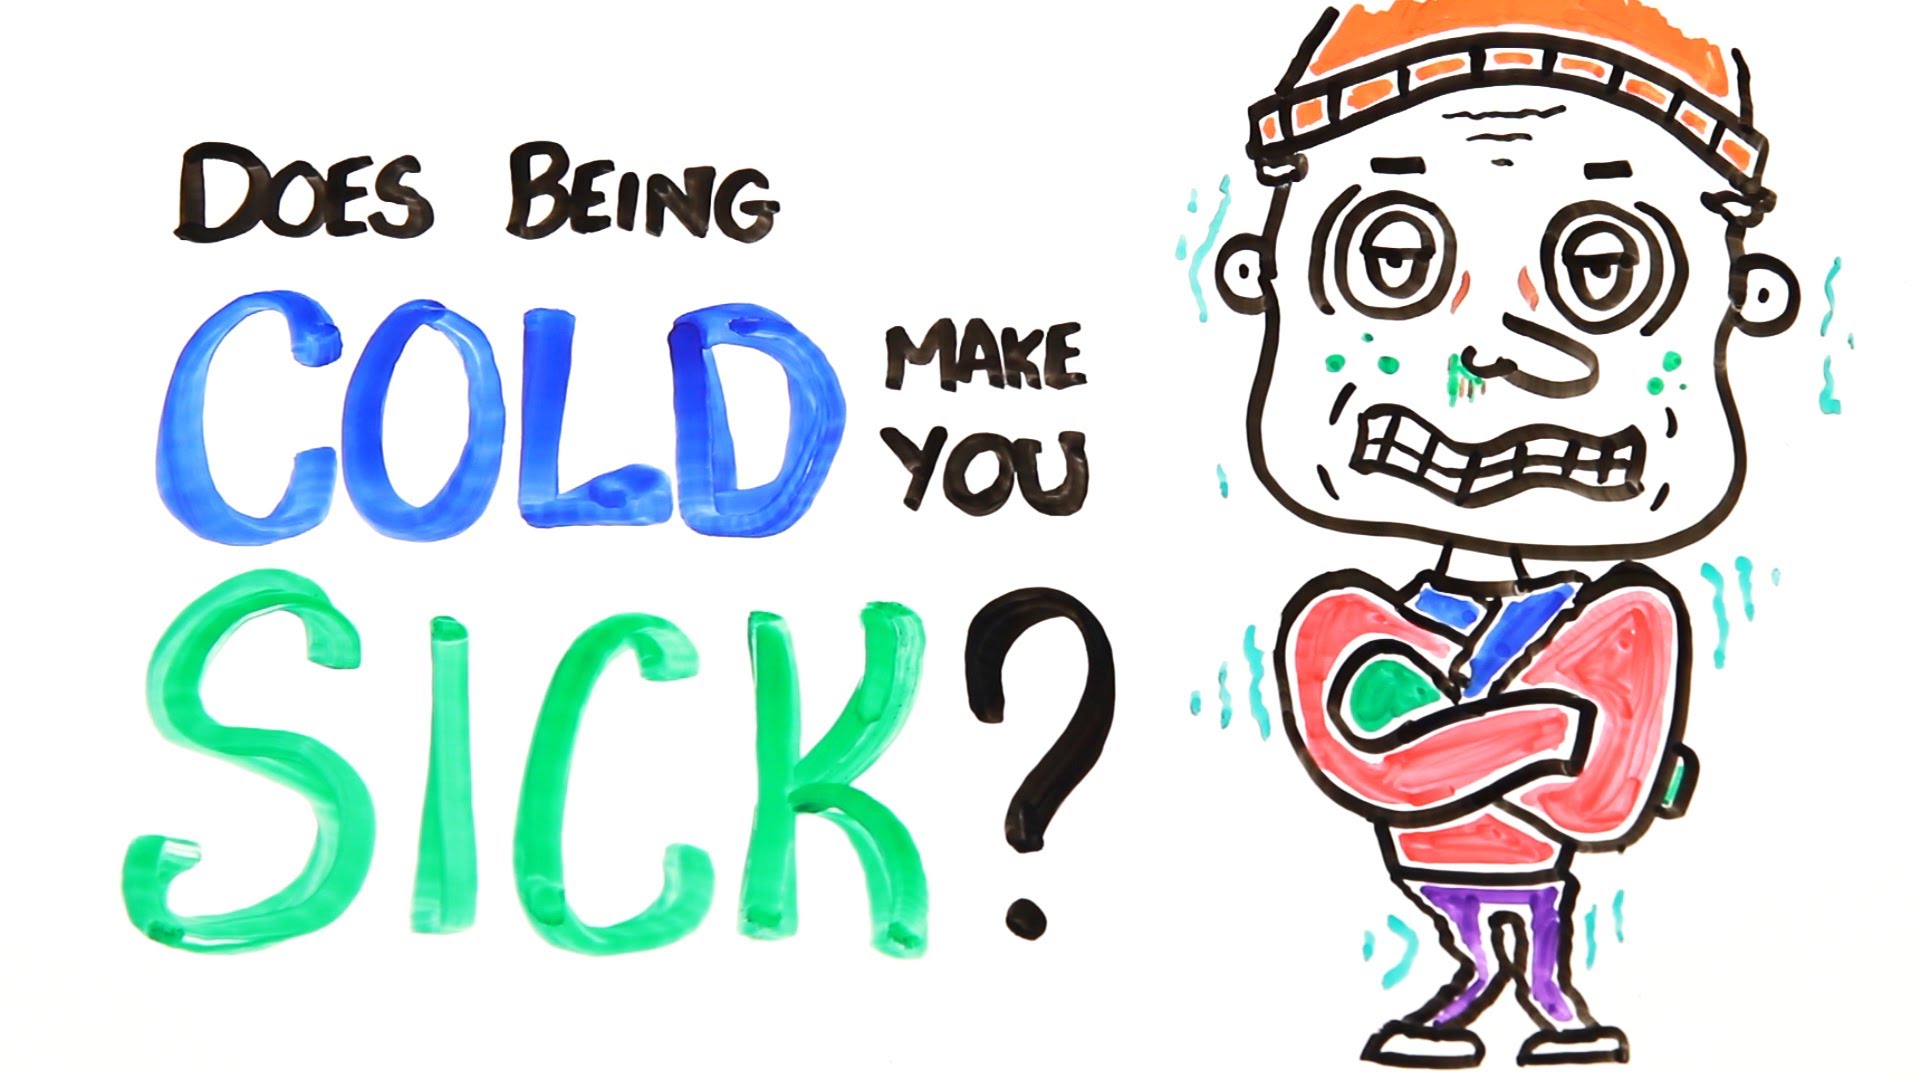 Does Being Cold Make You Sick?